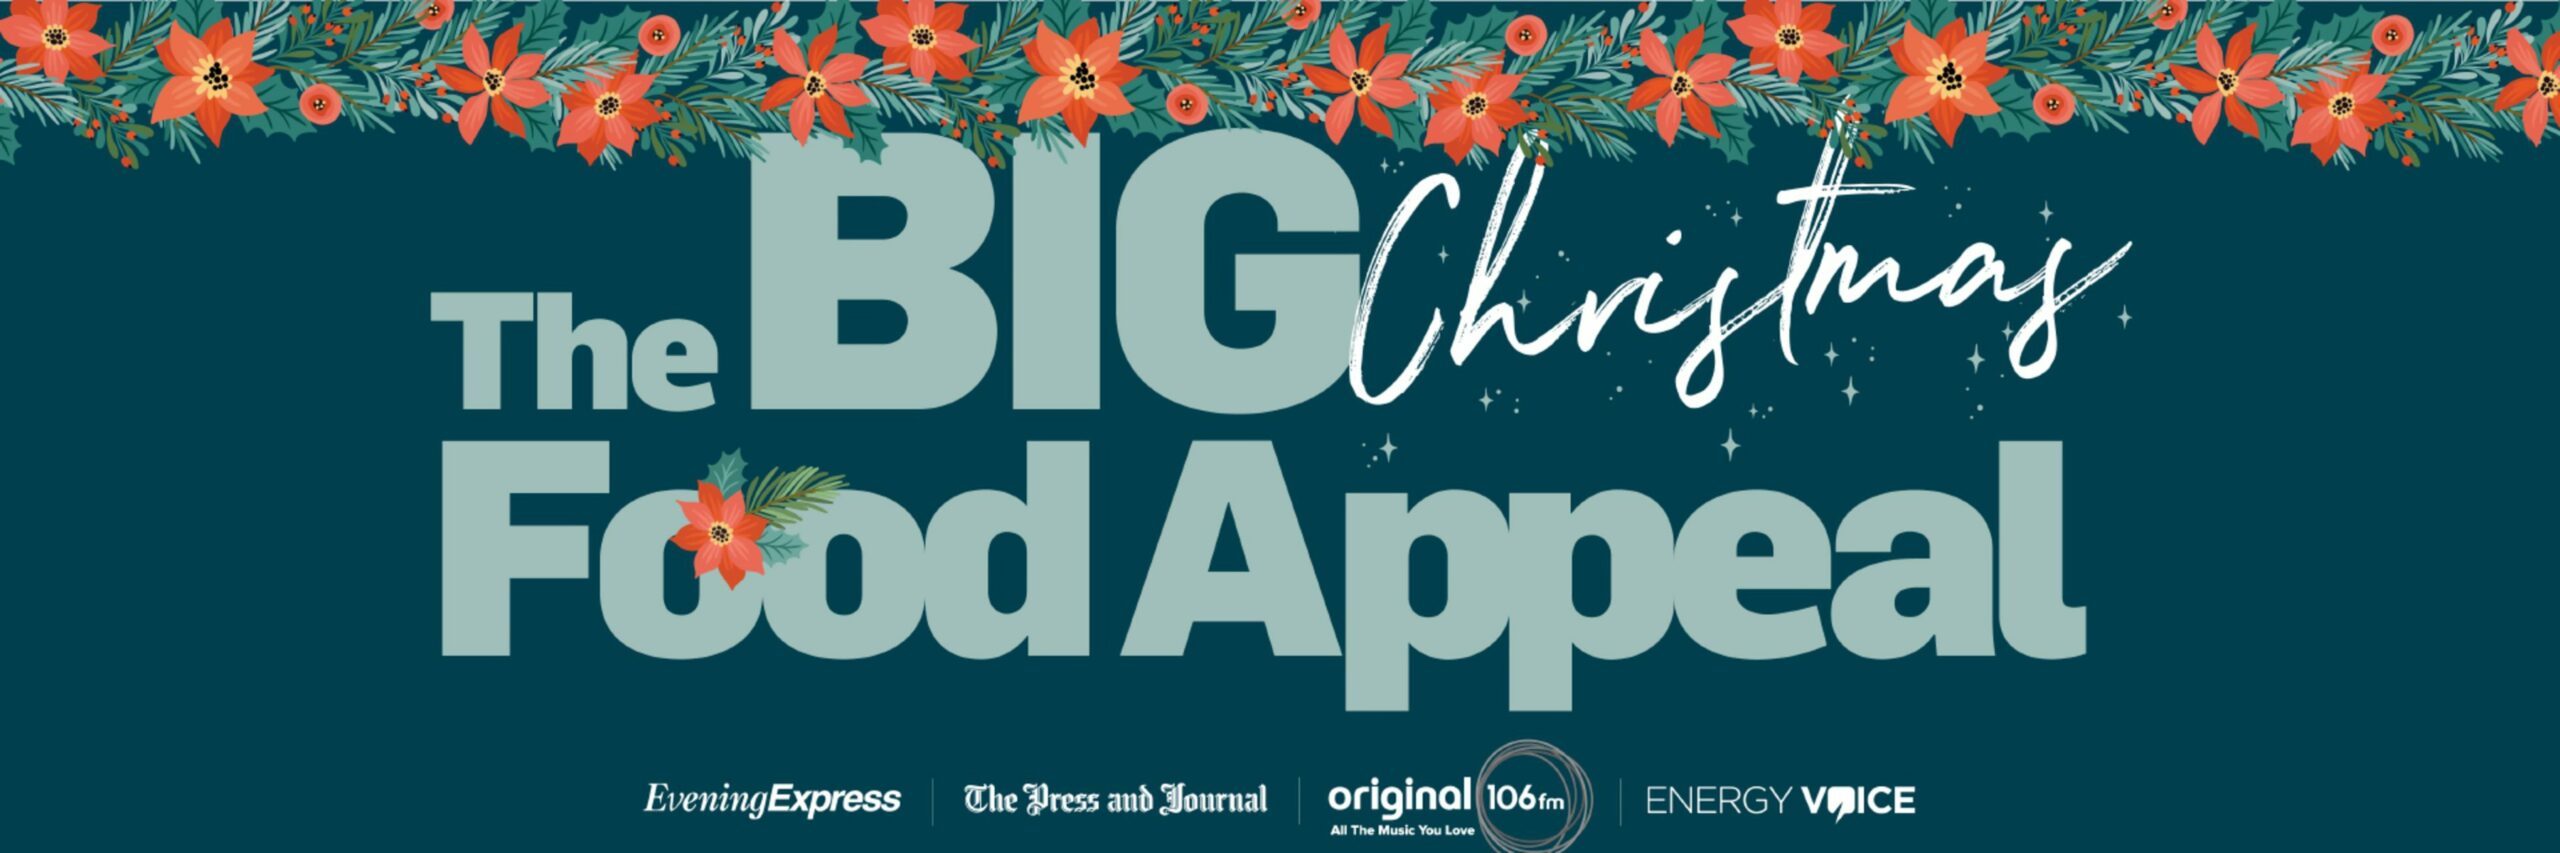 Image button, click to visit Big Christmas Food Appeal homepage